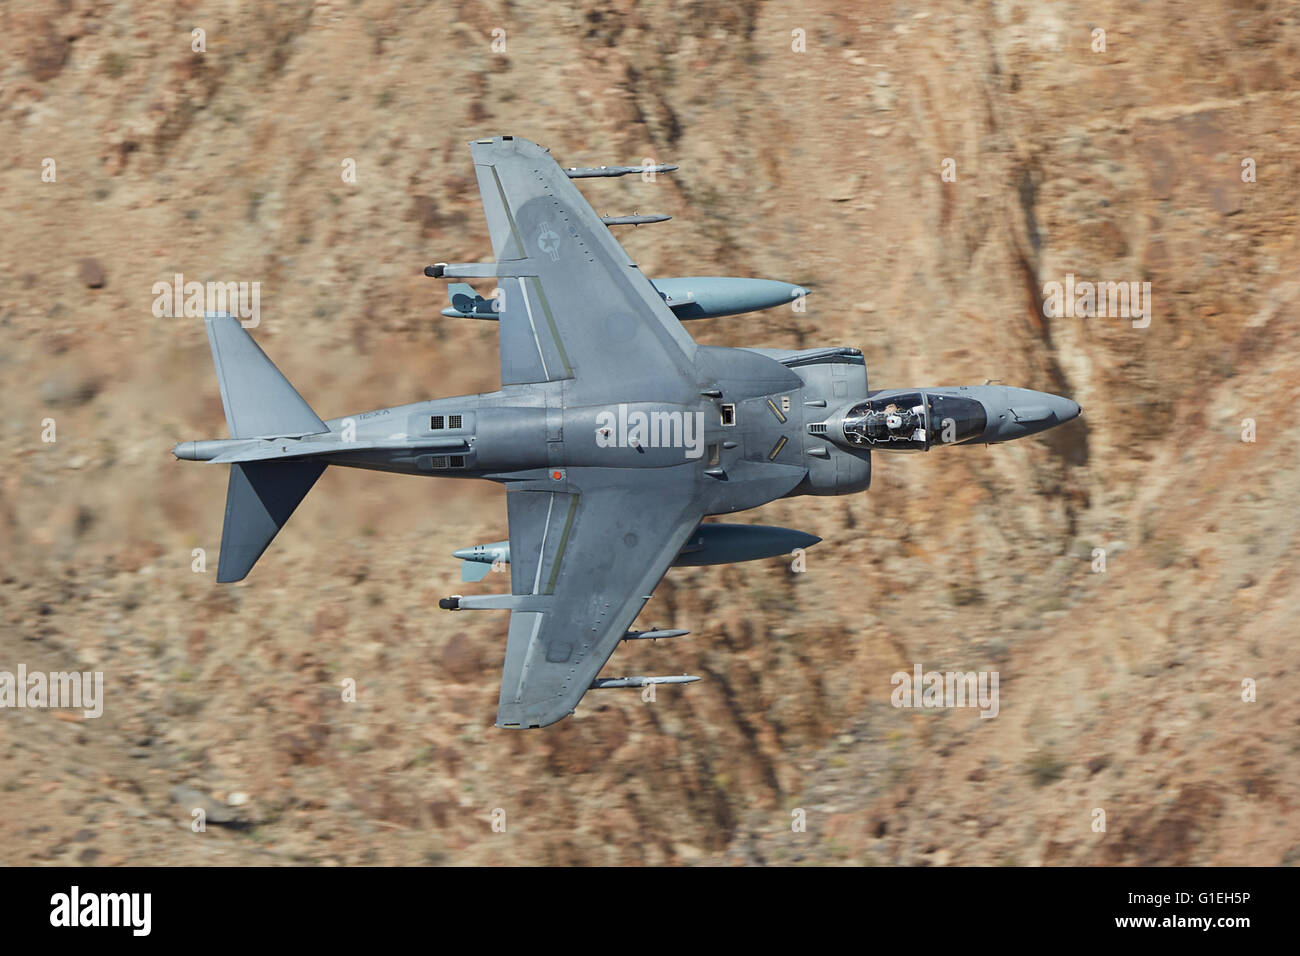 United States Marine Corps AV-8B Harrier II V/STOL Ground Attack Jet Flying At Low Level And High Speed Through A Desert Valley In California, USA. Stock Photo